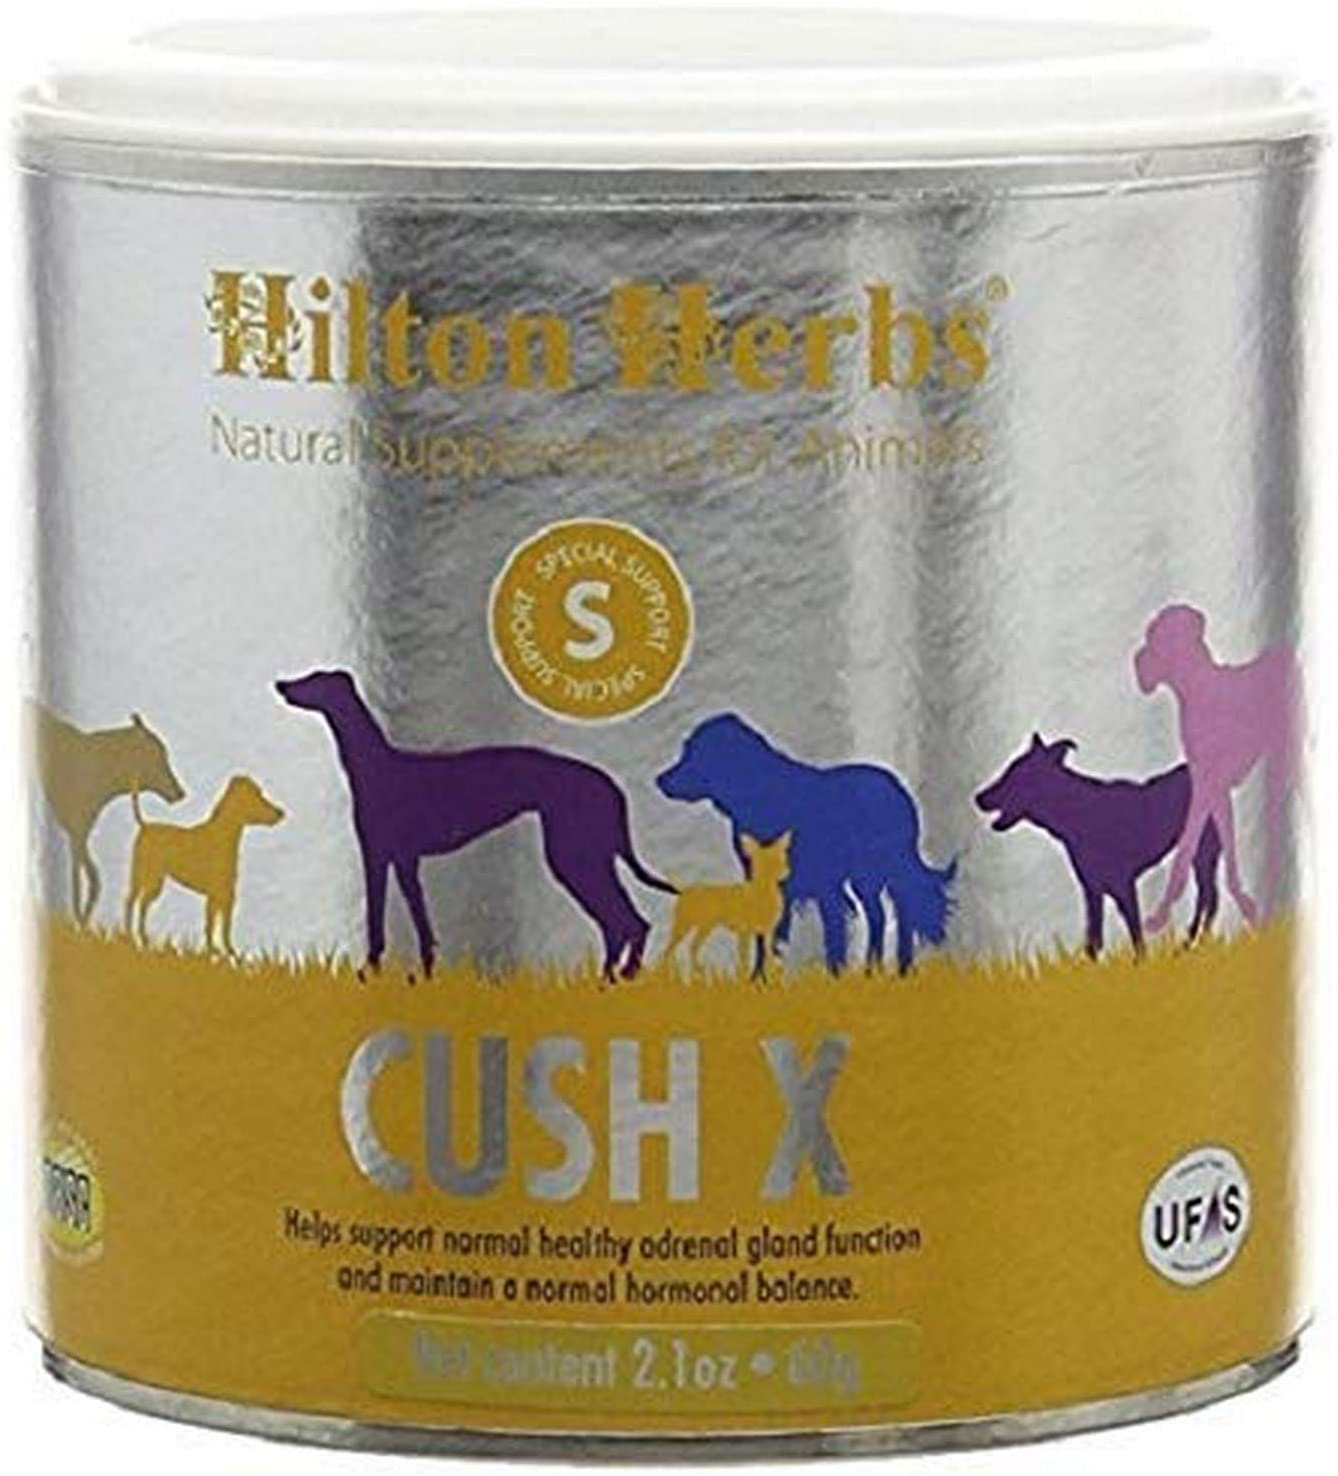 Hilton Herbs Canine Adrenal Gland Support Supplement for Dogs, 2.1 oz Tub